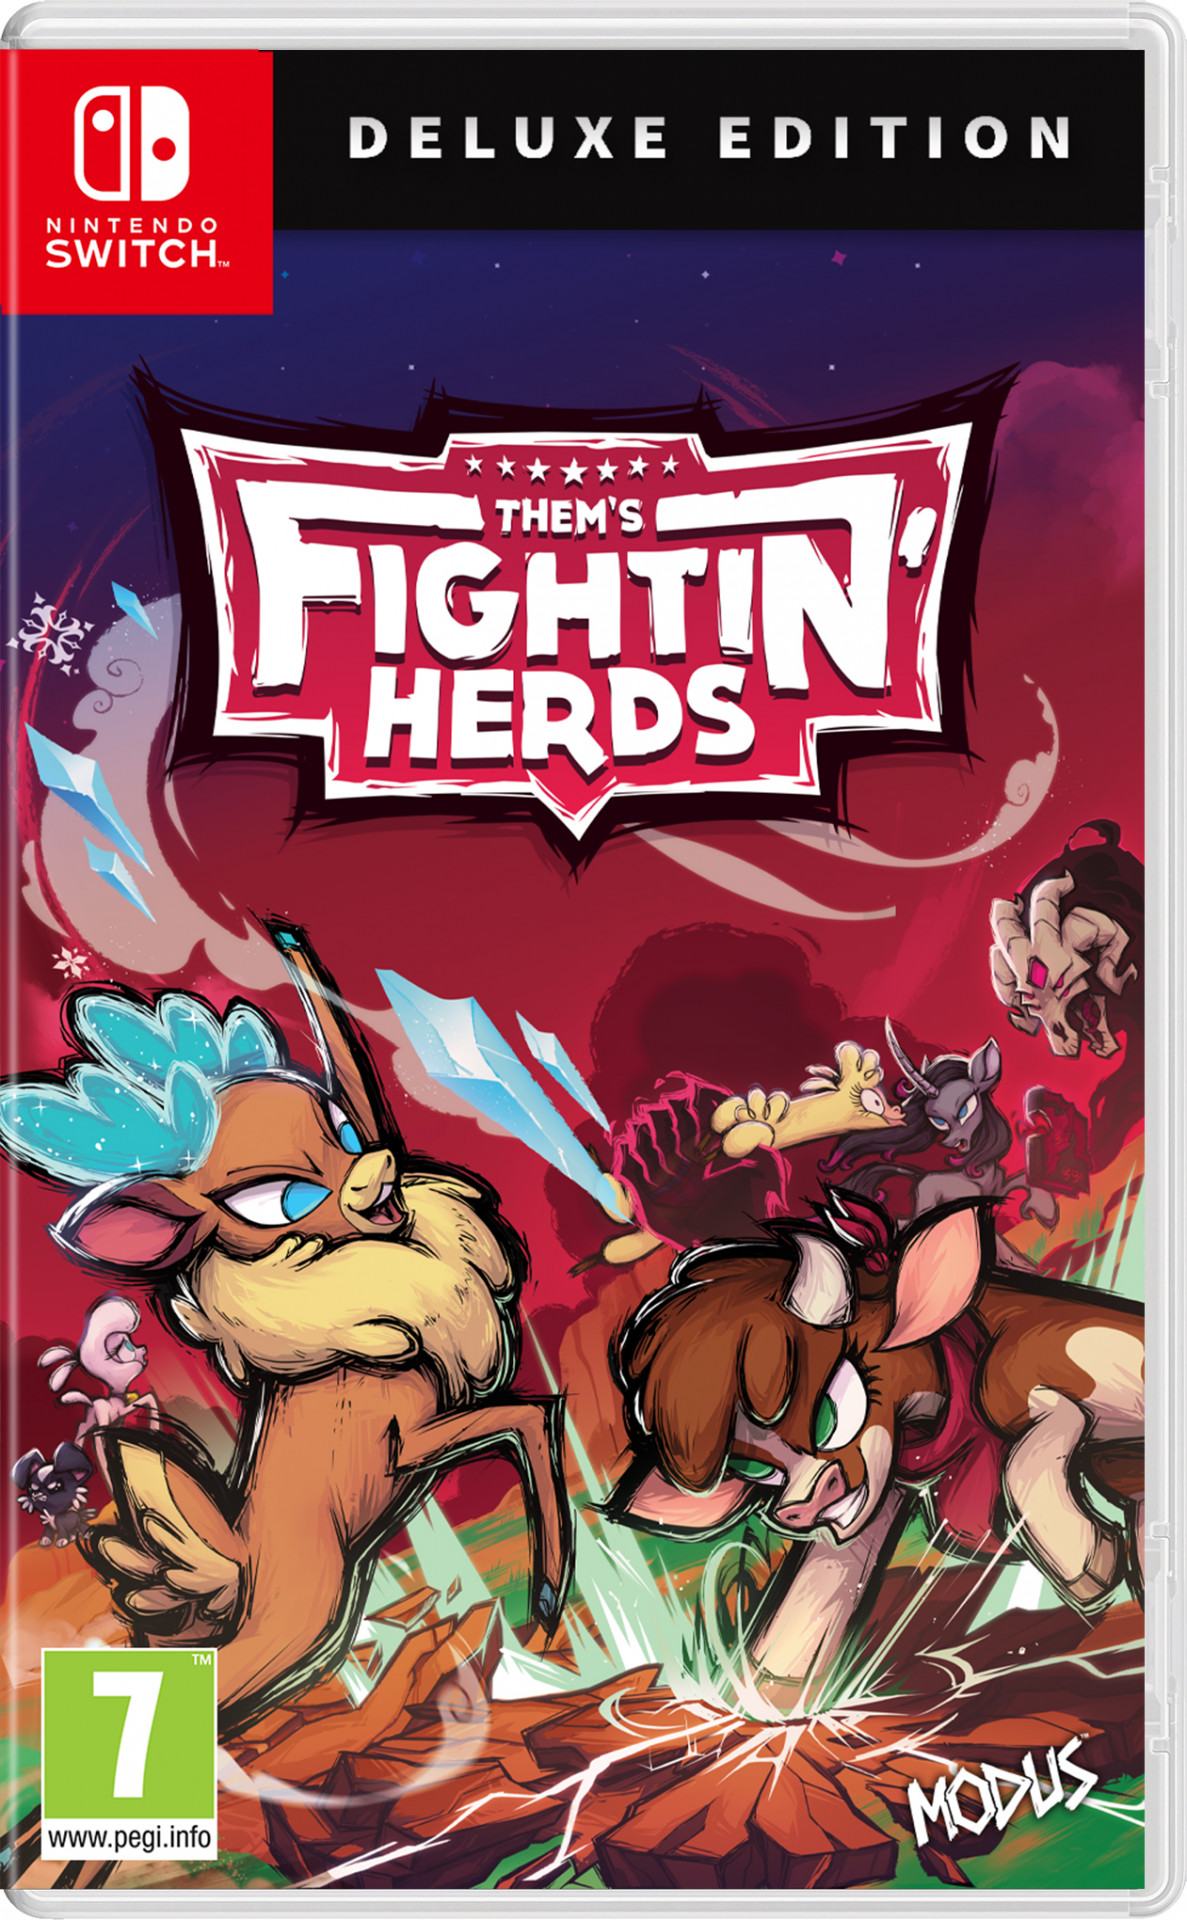 Them's Fightin' Herds Deluxe Edition